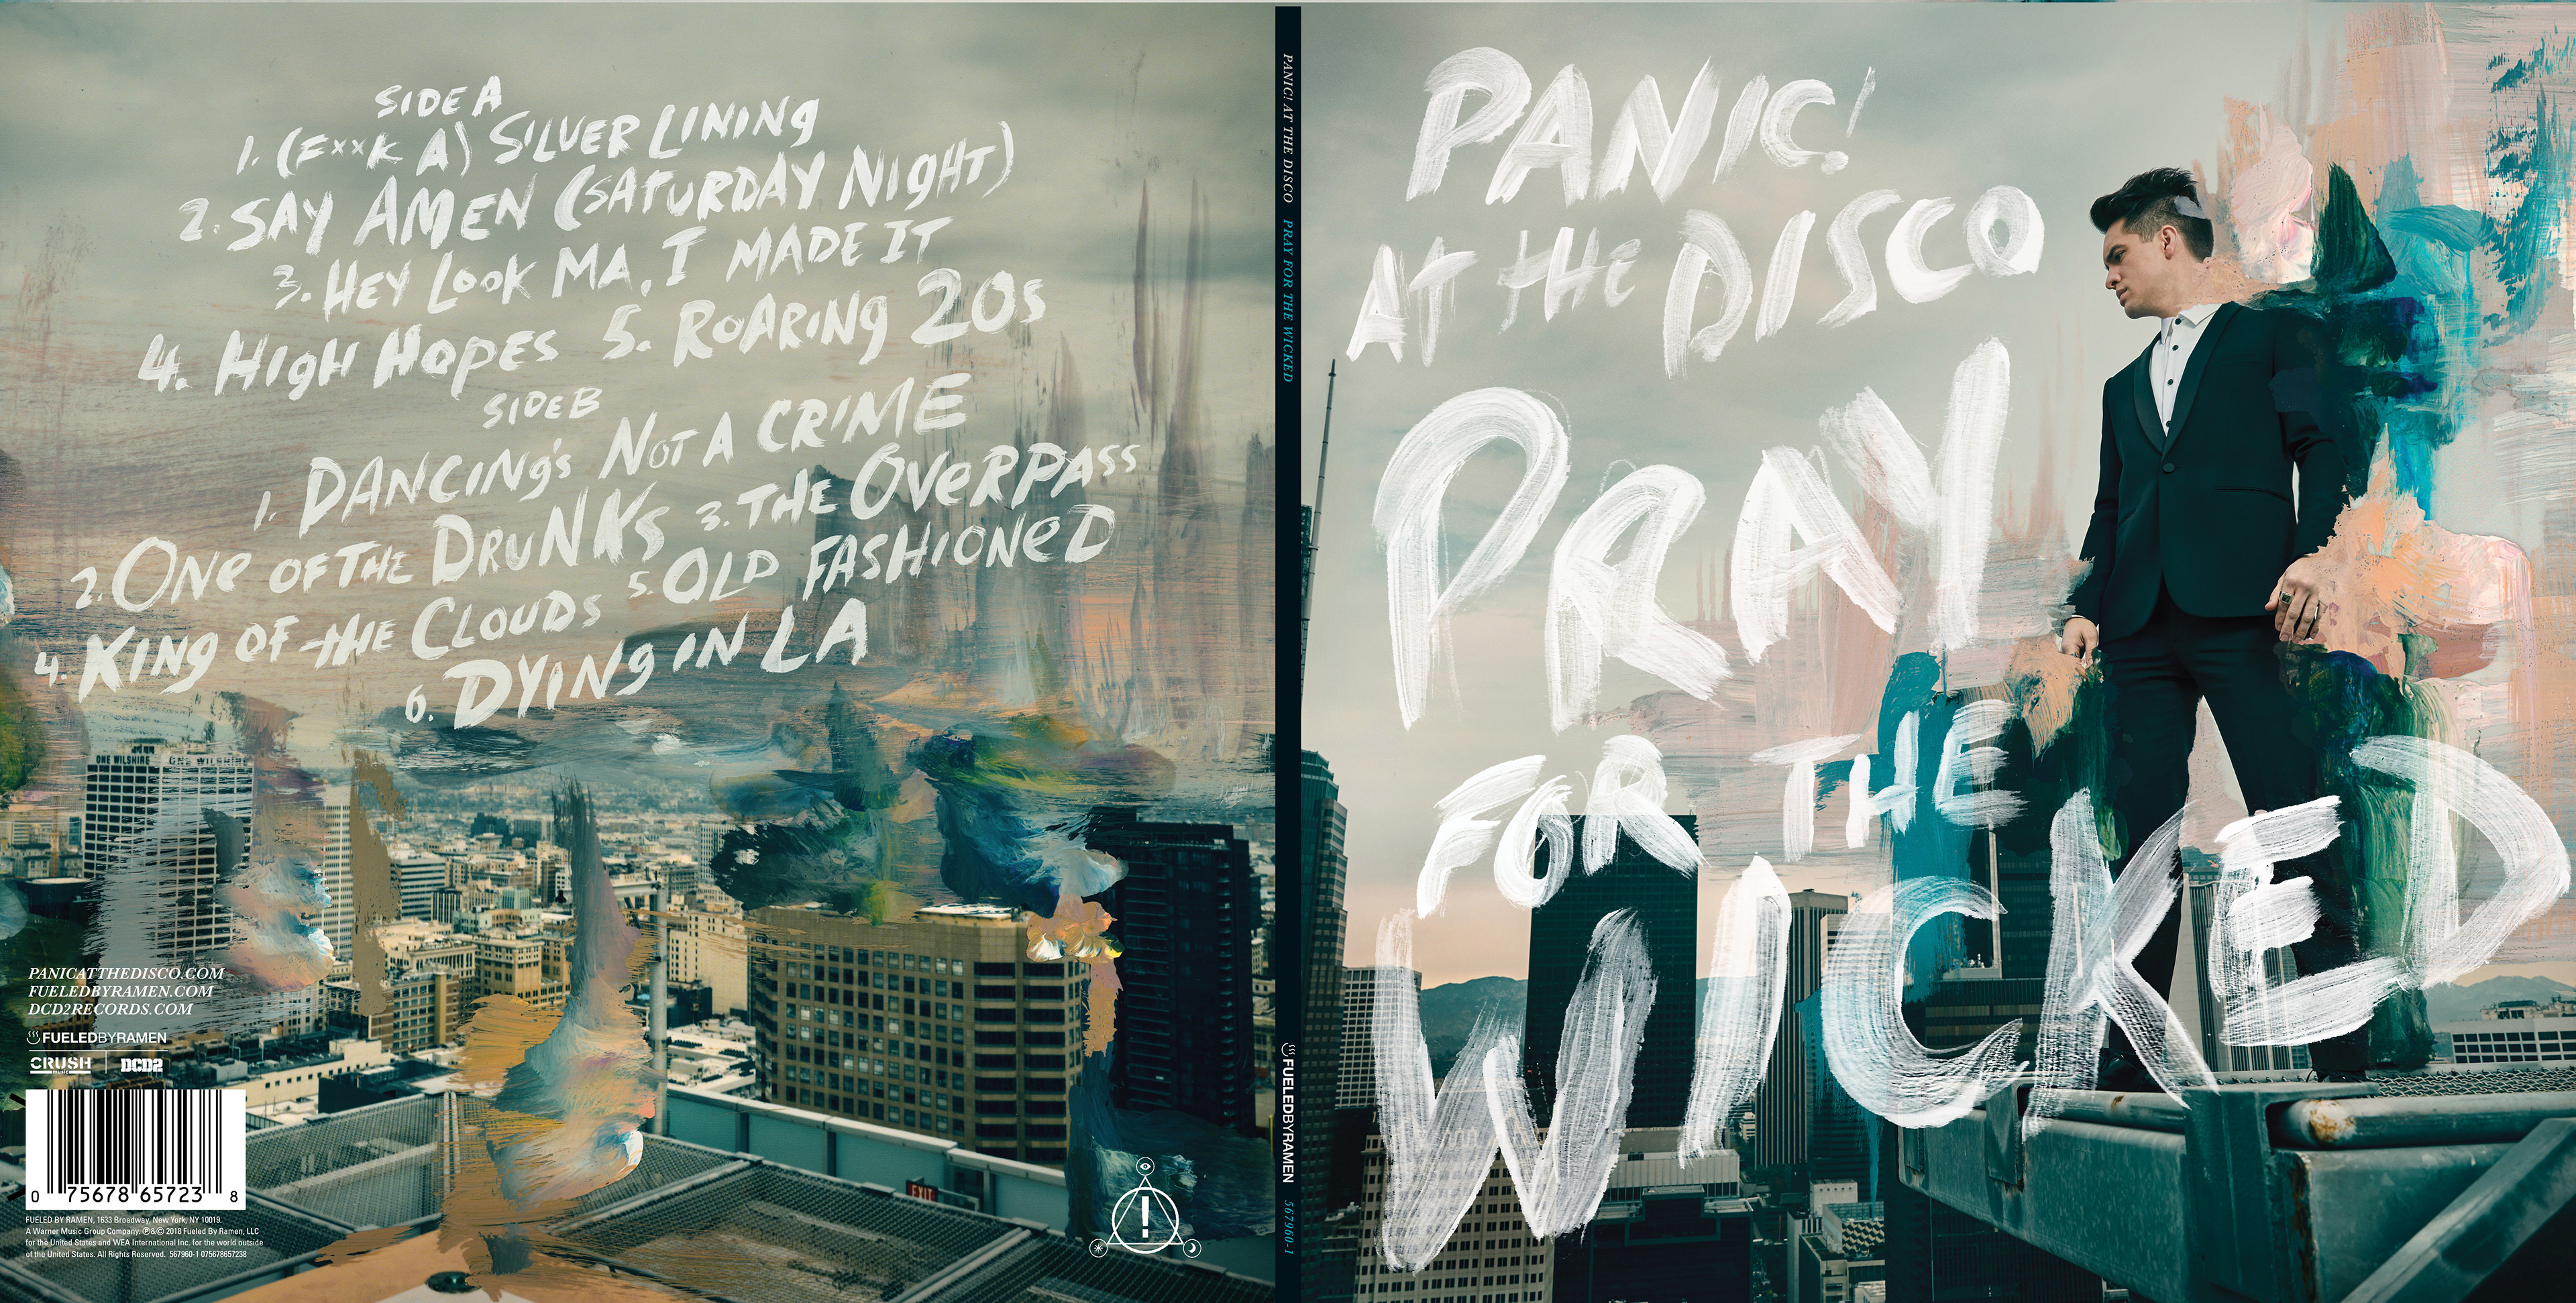 Panic At The Disco Albums In Order